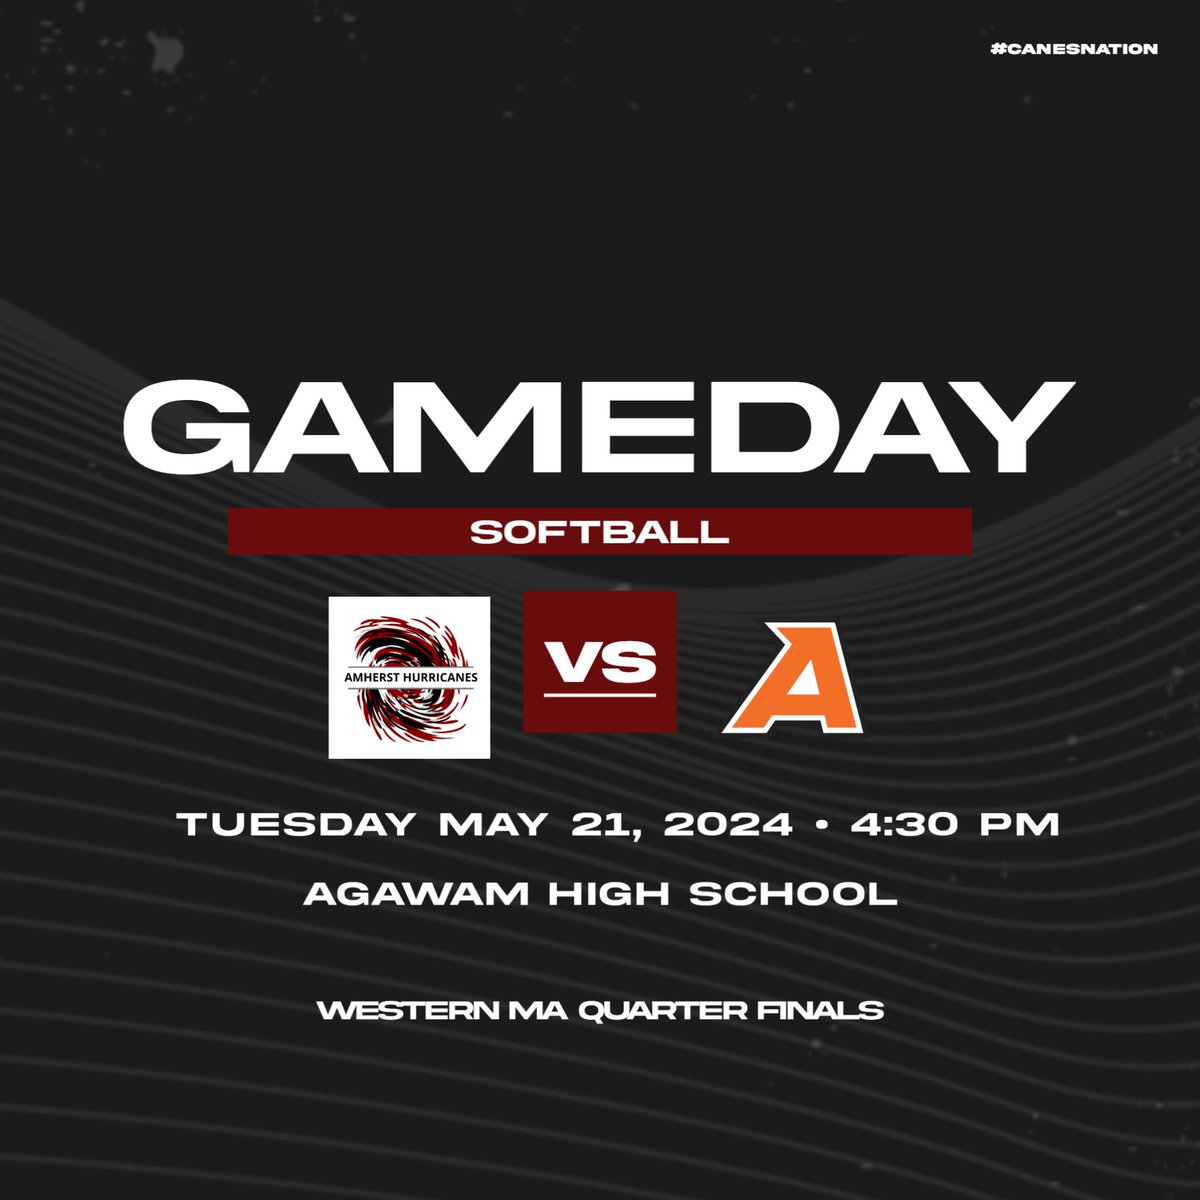 Come out and support our Hurricanes compete in the Westem MA Quarter Finals! 4:30 PM @AgawamHigh #CanesNation